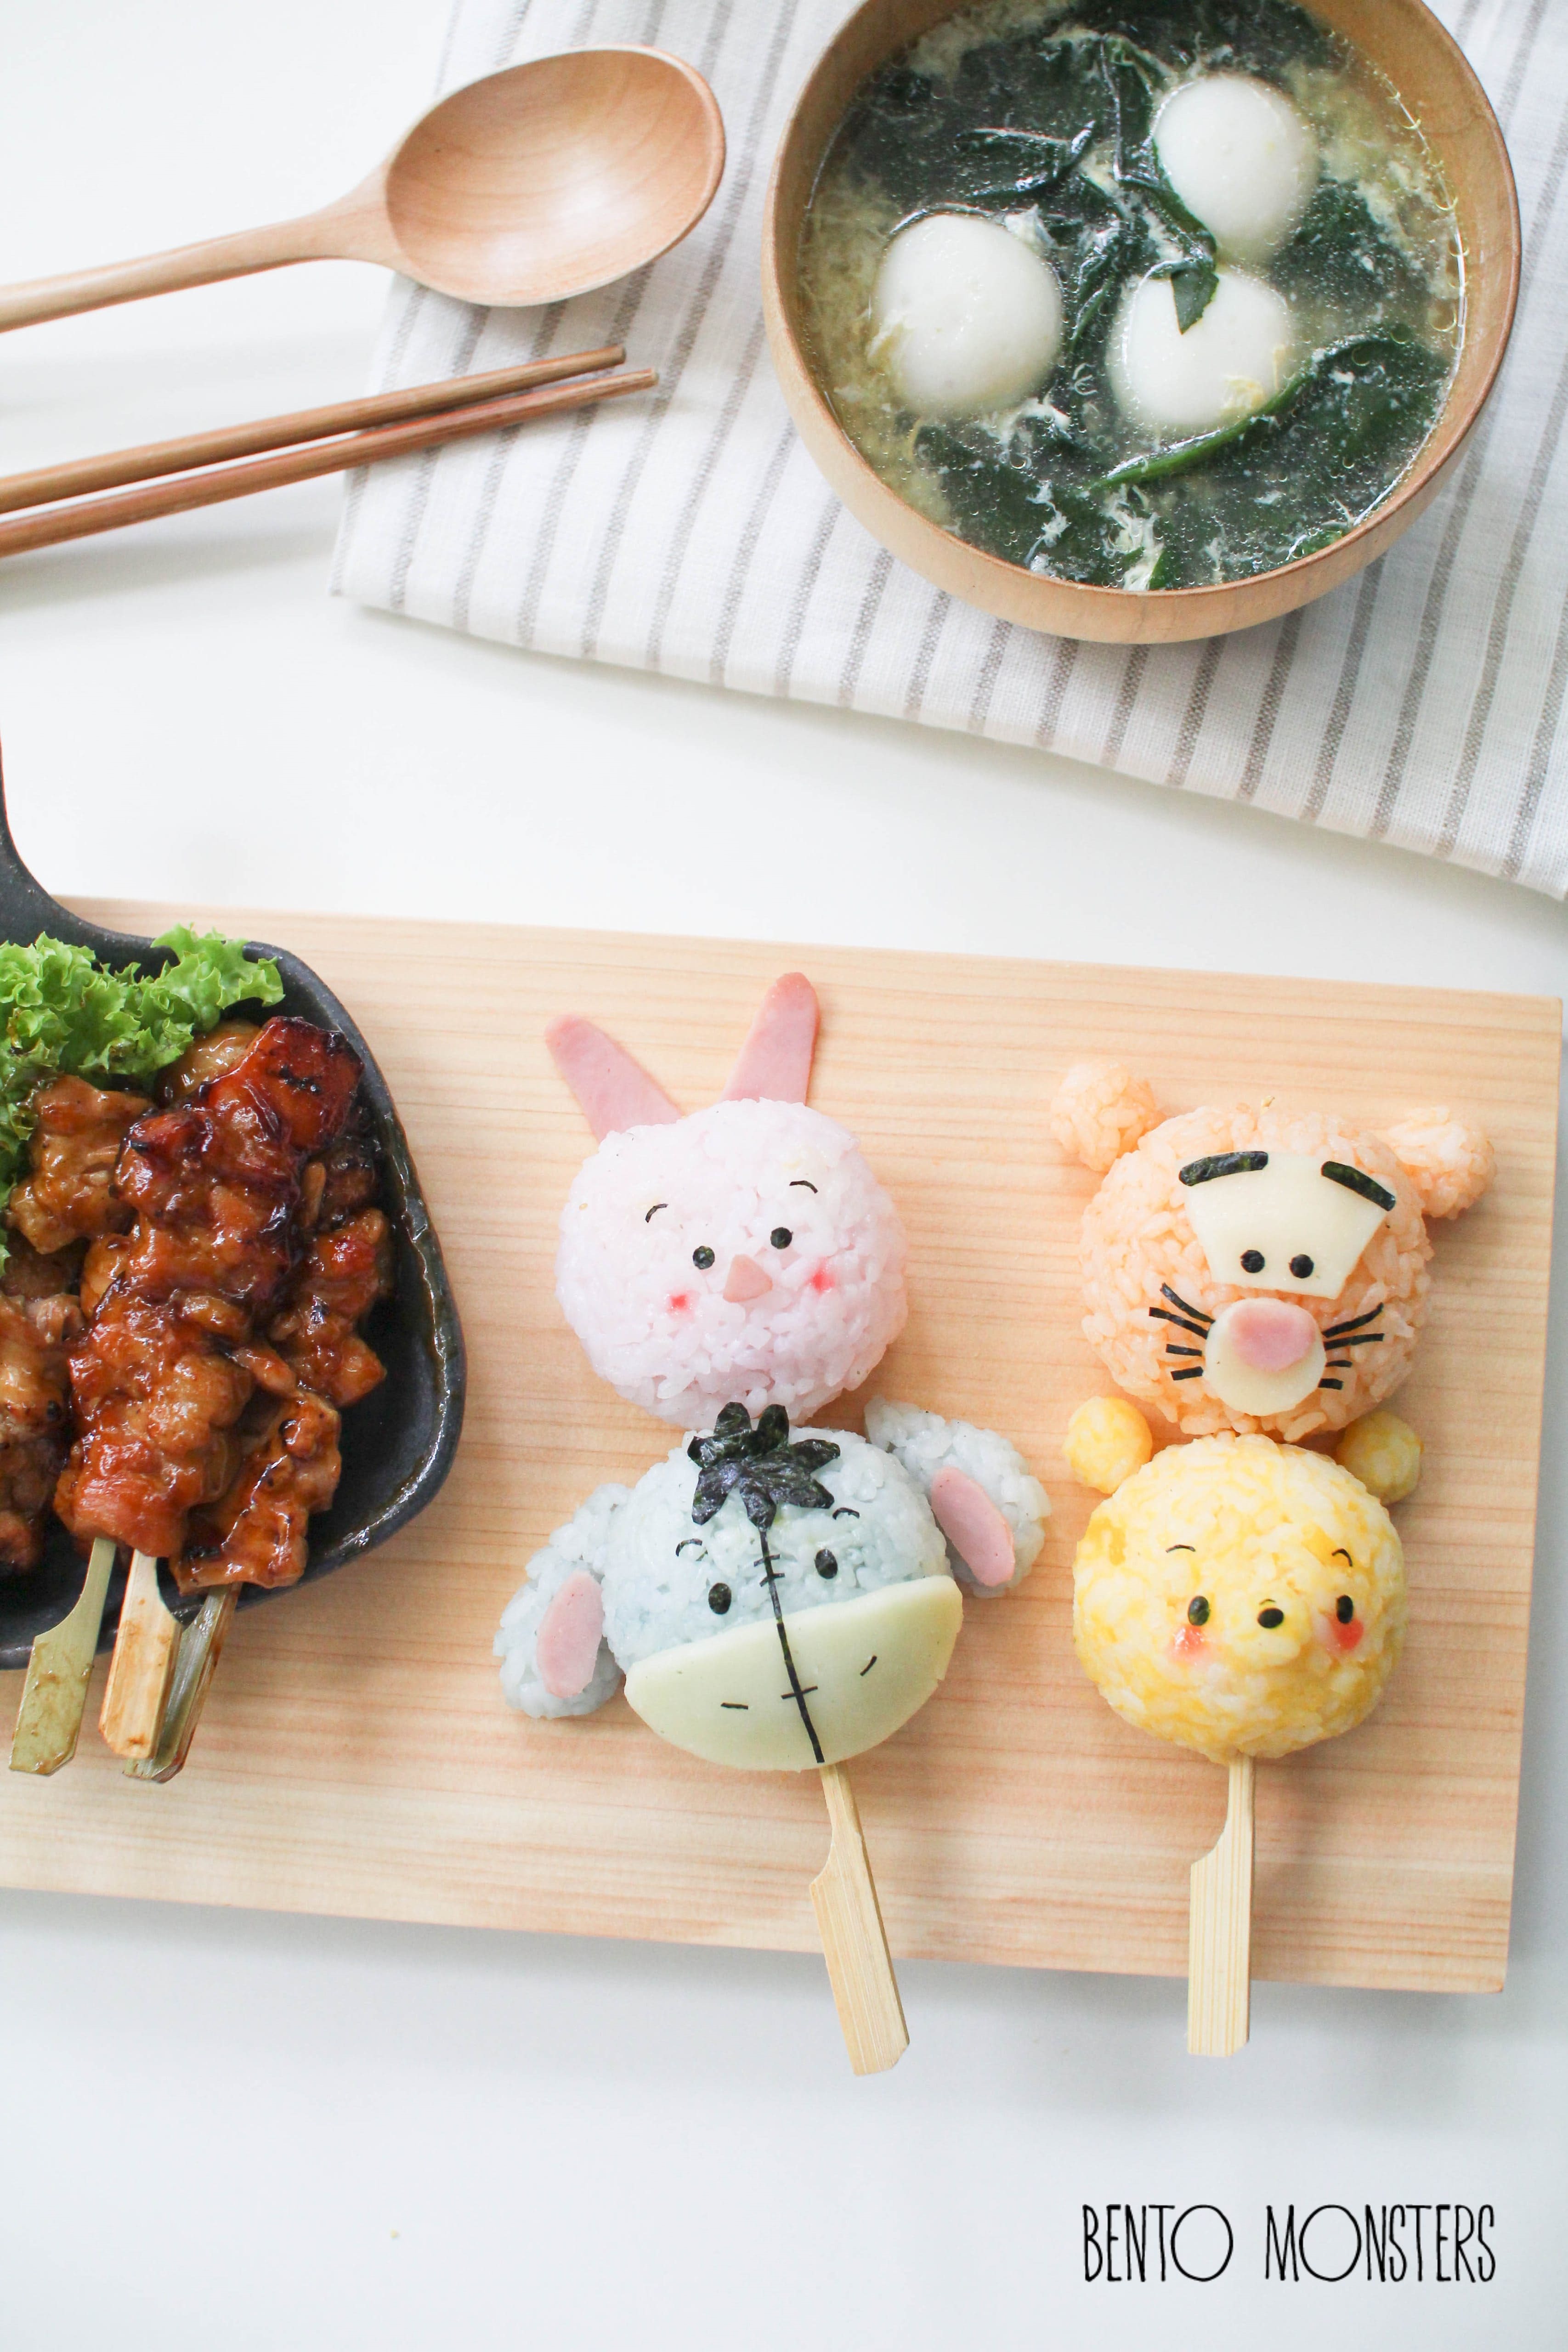 Winnie the Pooh Rice Ball Kabobs made by Bento Monsters